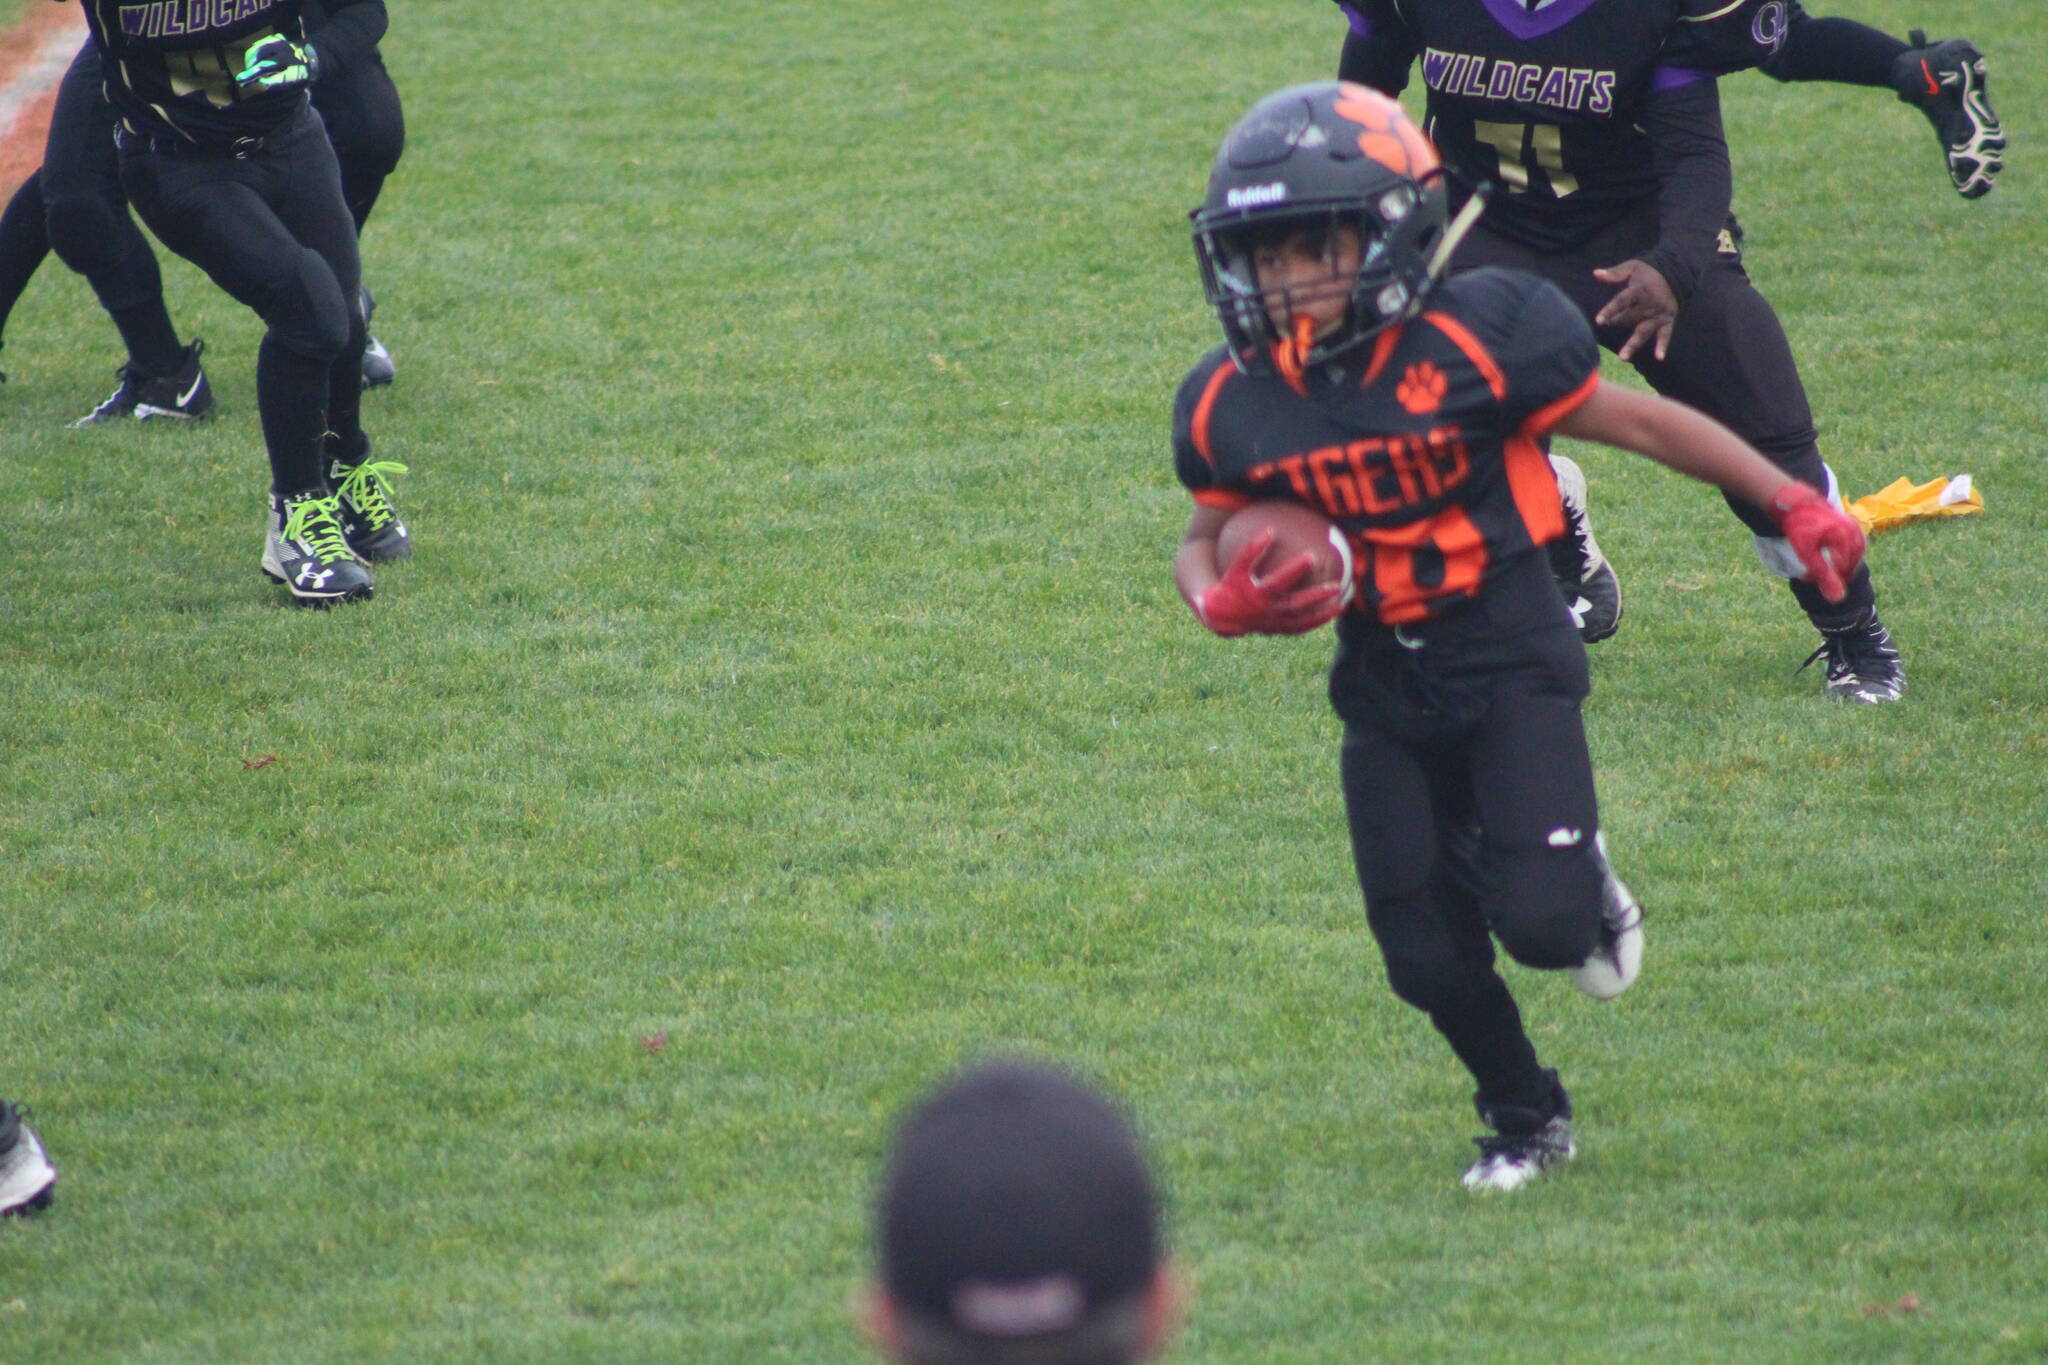 Heather Spaulding/Staff photo
Pee Wees run to make a touchdown.